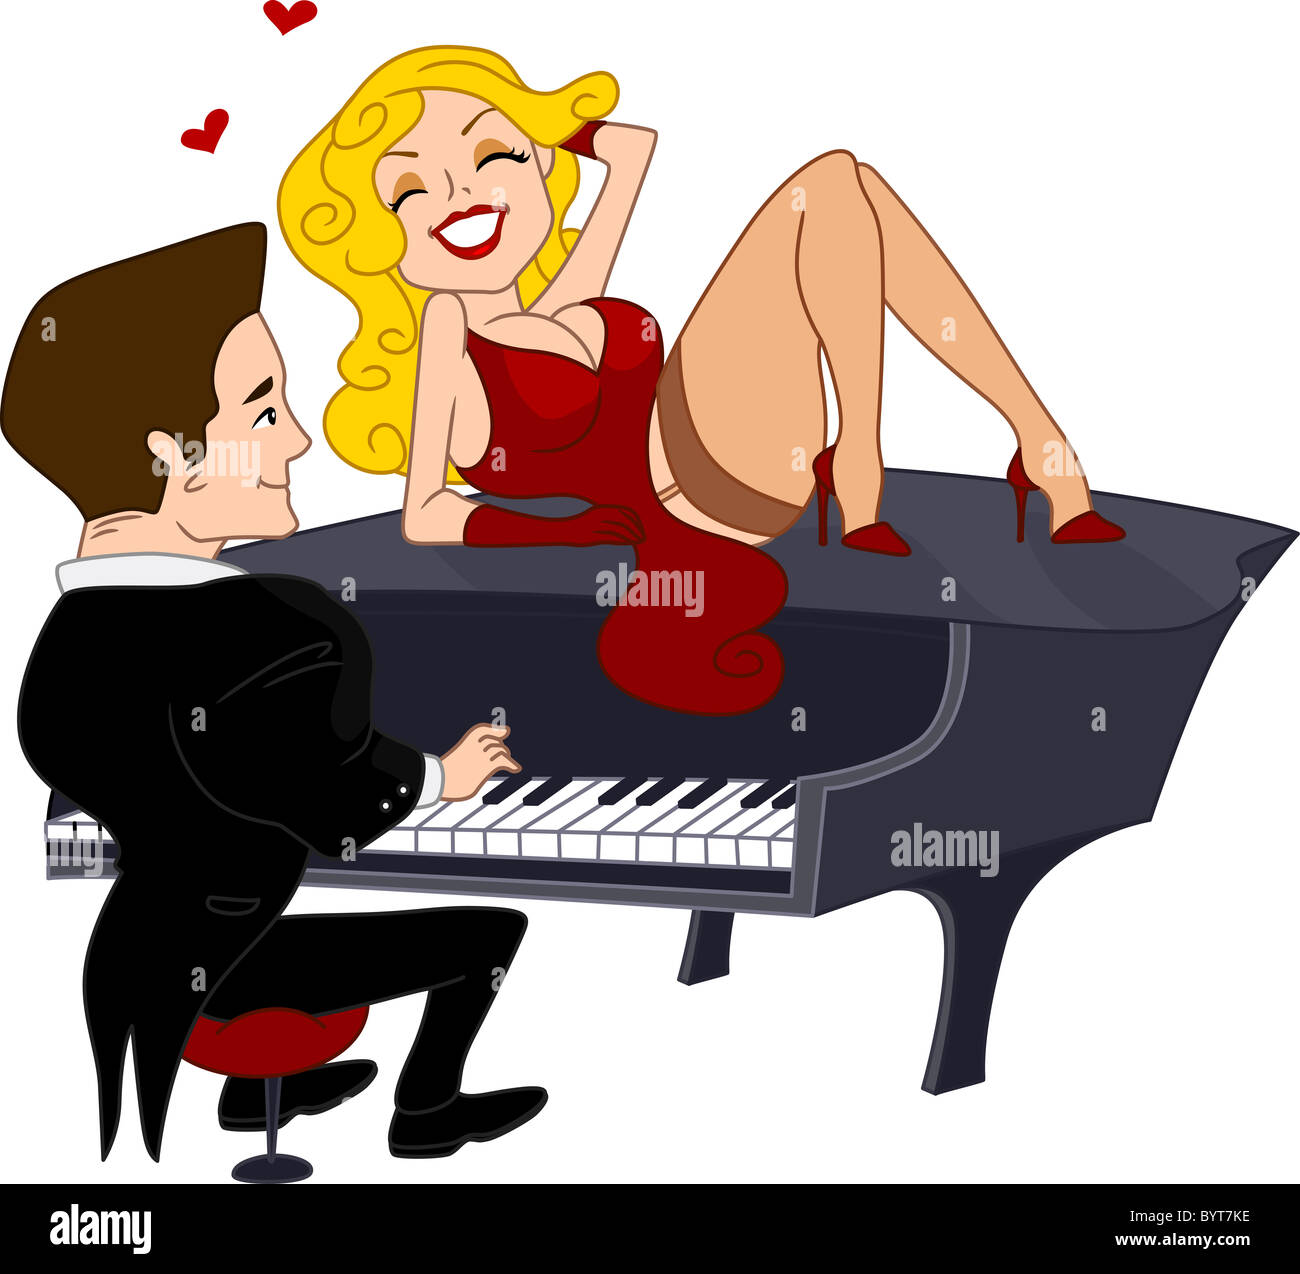 Illustration of a Pinup Girl Lying on Top of a Piano While a Guy Plays  Stock Photo - Alamy